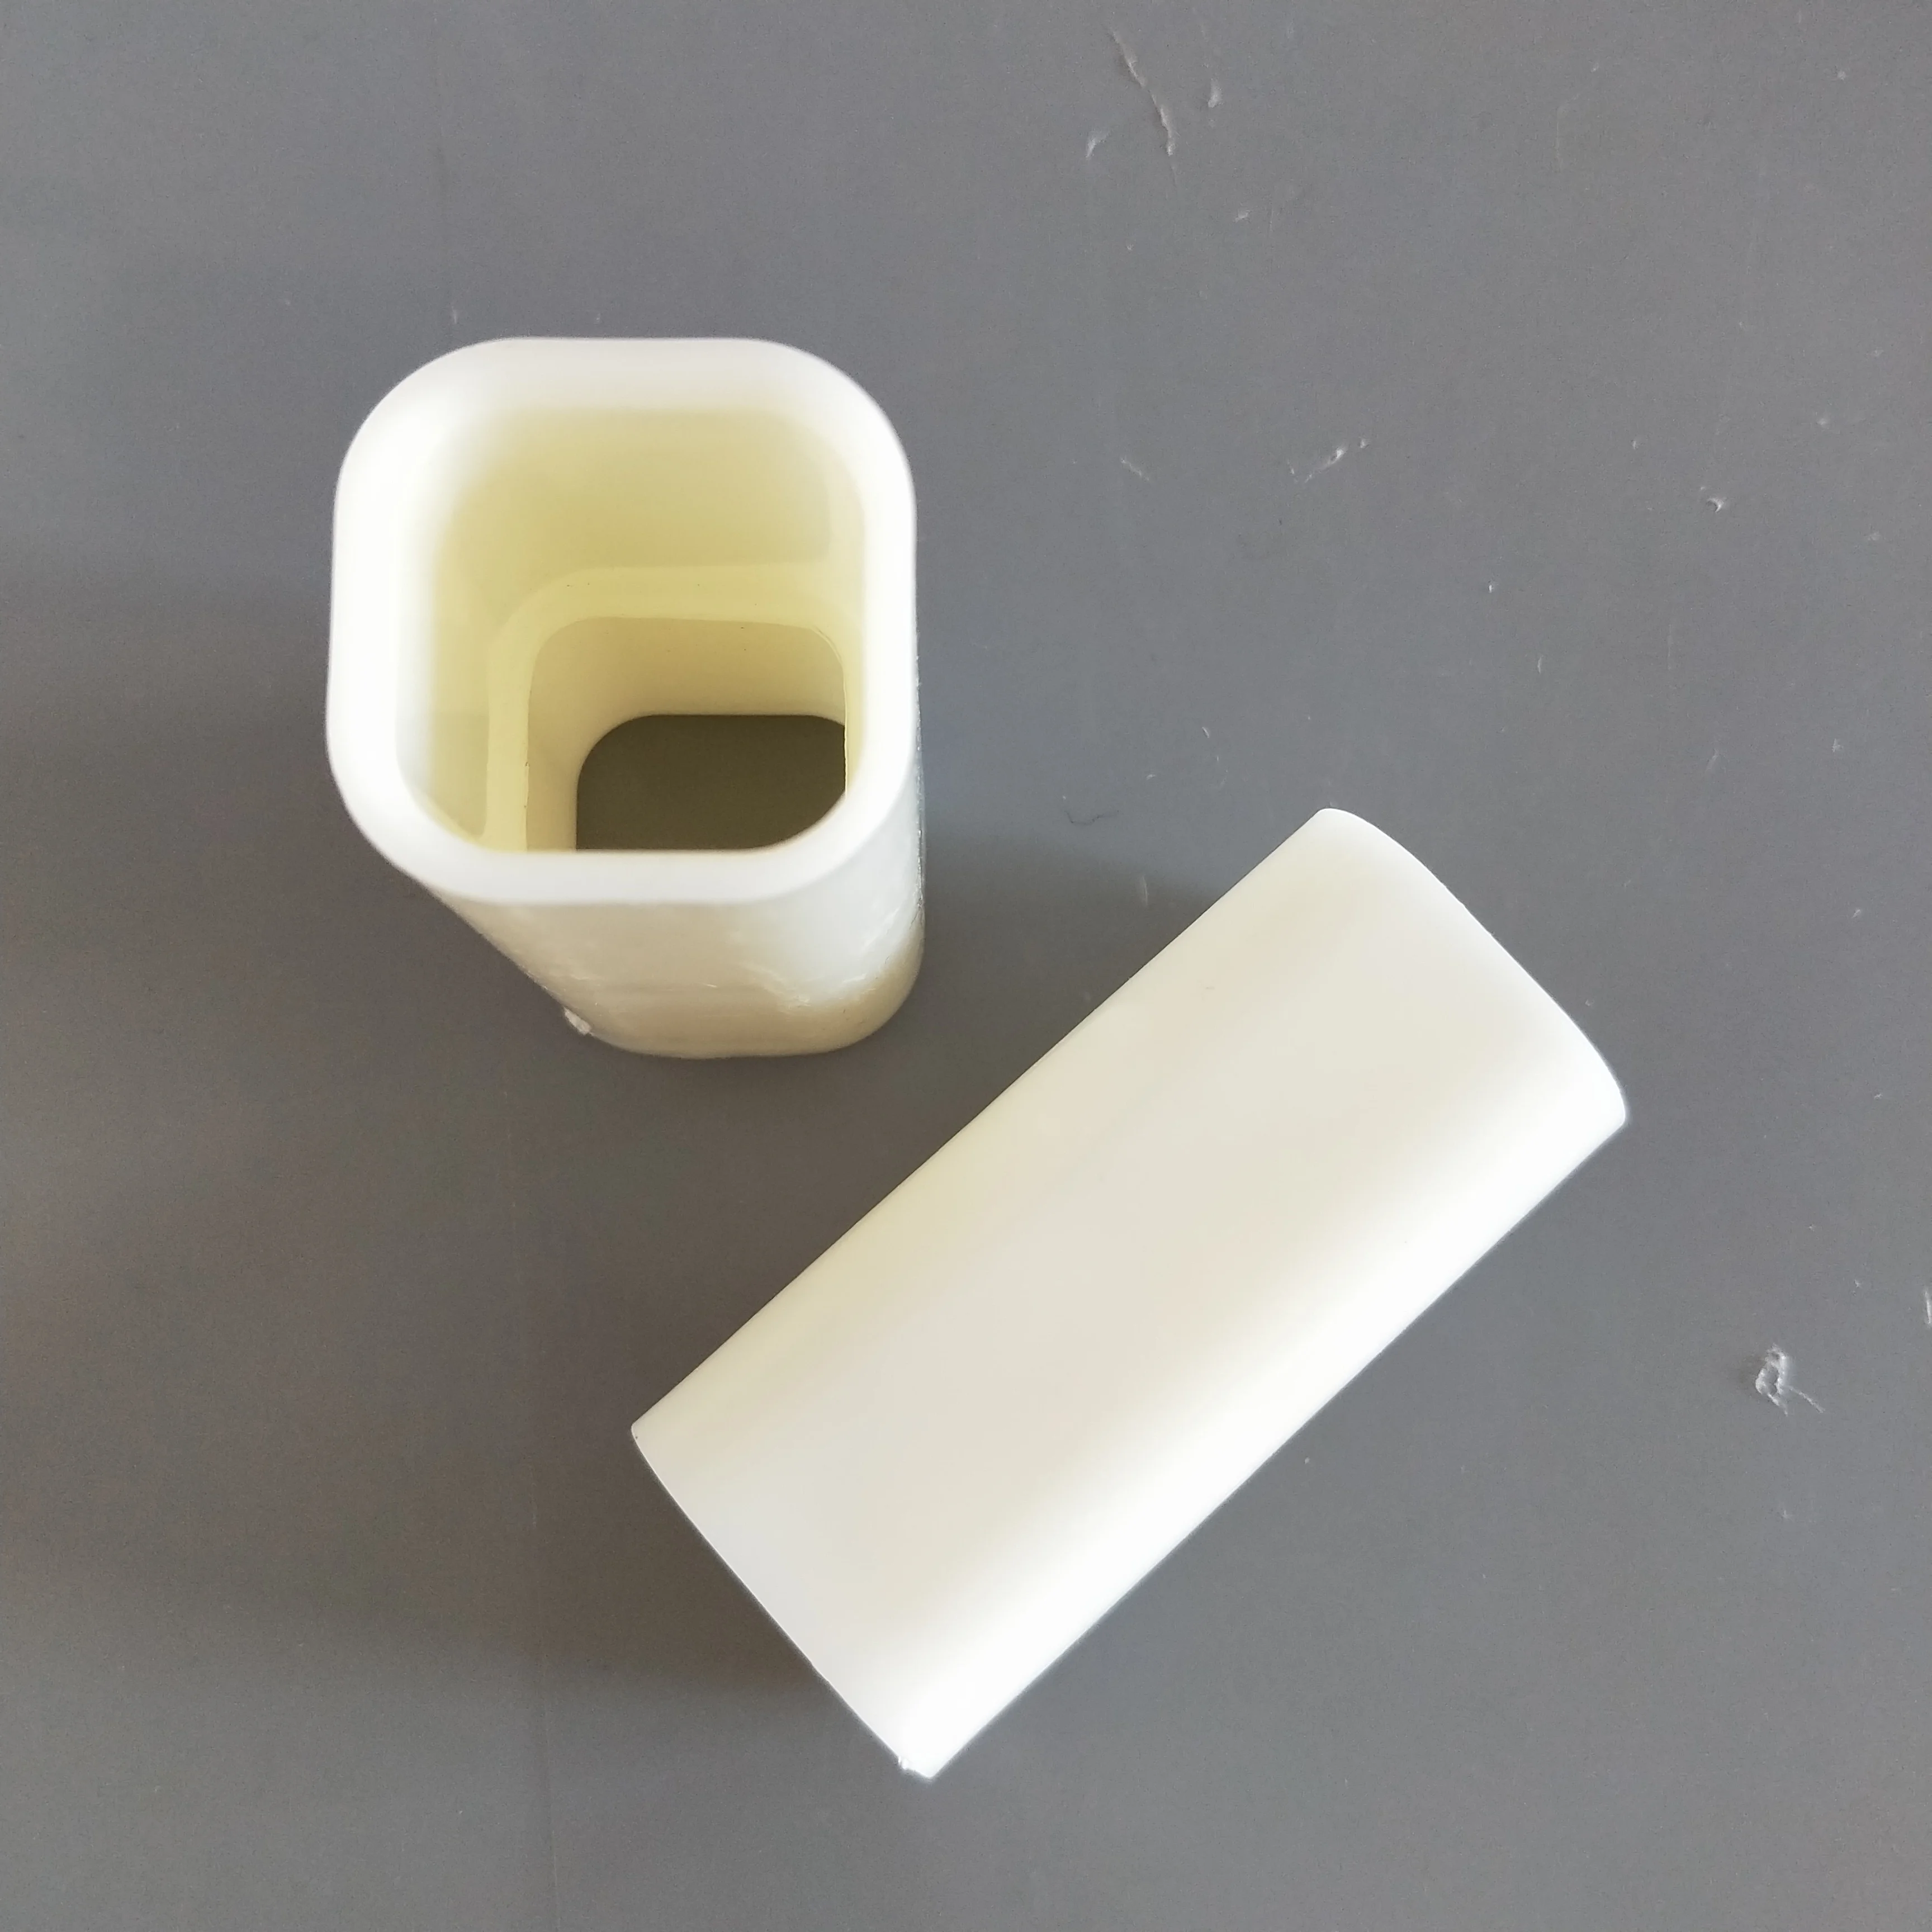 
Square Pipe Connector Accessory For Drinking Line System Of Poultry Farming Equipment PH-98 